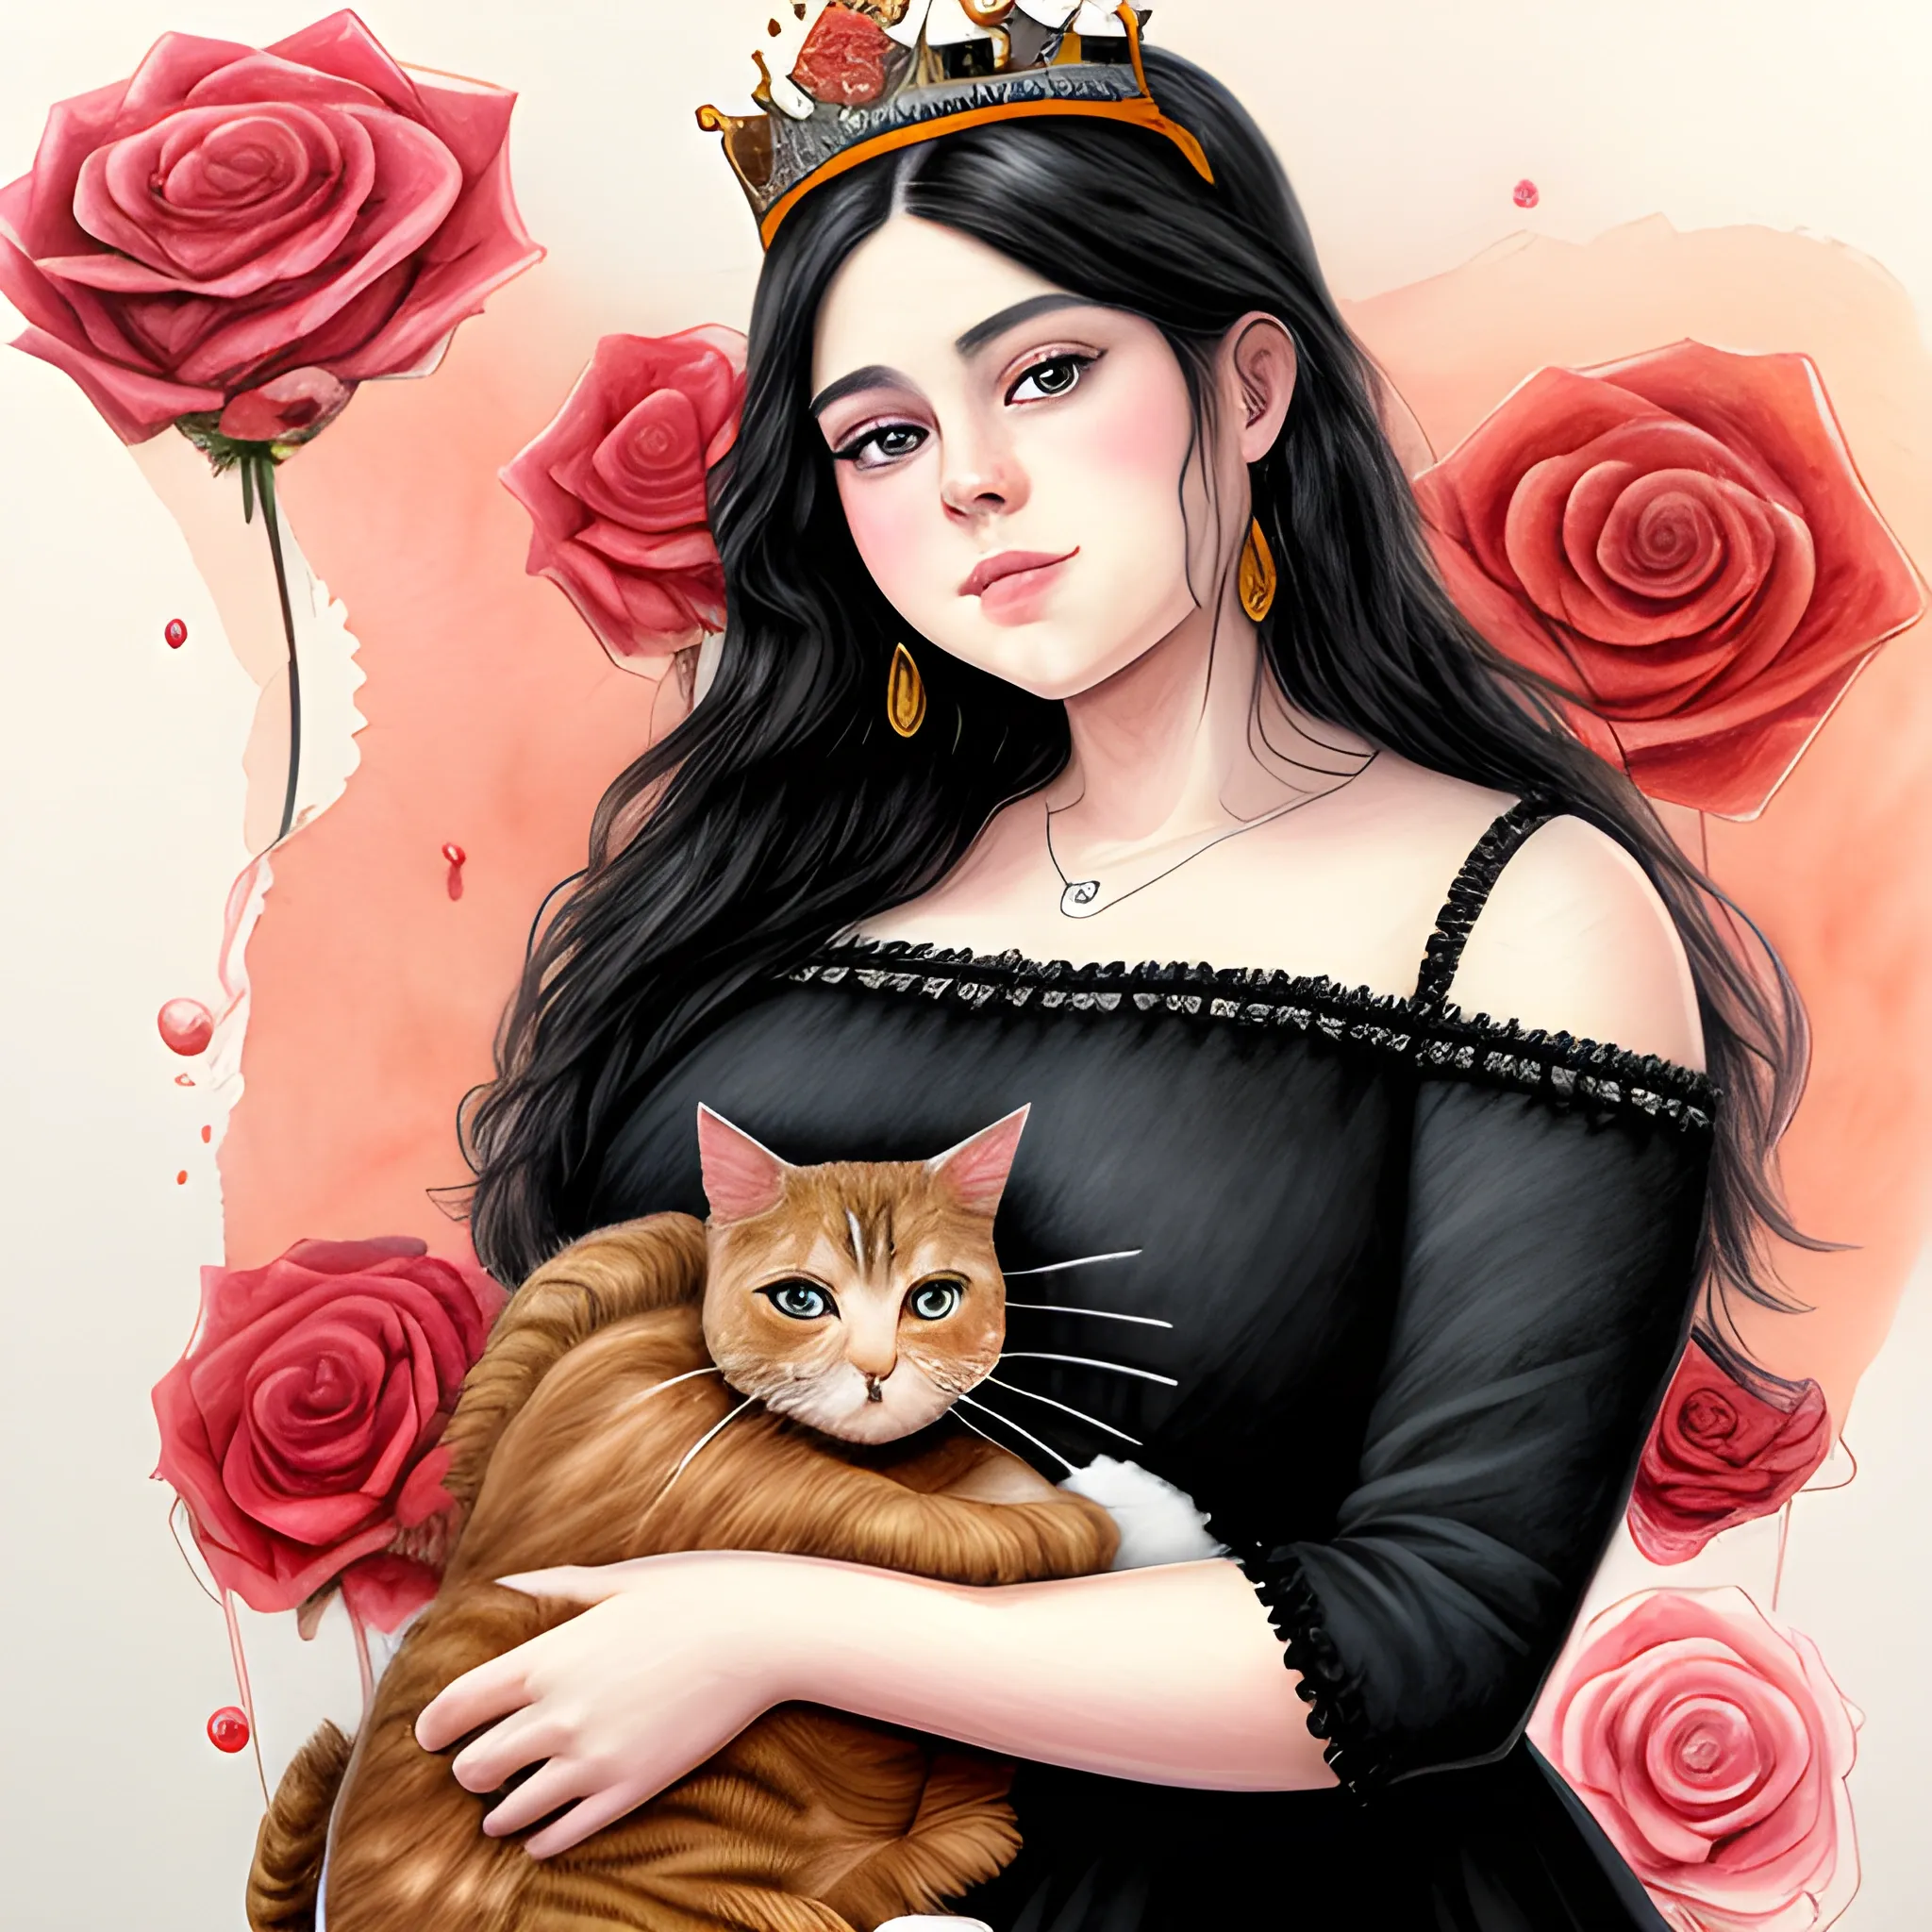 (((high detail))), best quality, Warm Colors, (detailed), (high resolution)Black long-haired female adult, full body, curvy face, with rosy cheeks, big black eyes, thick eyelashes, thick peach lips, thick eyebrows,  with a black and red dress, roses of backround  
holding a bloody crown in her hand, with a cat in her lap wallper , Oil Painting, Pencil Sketch, Water Color